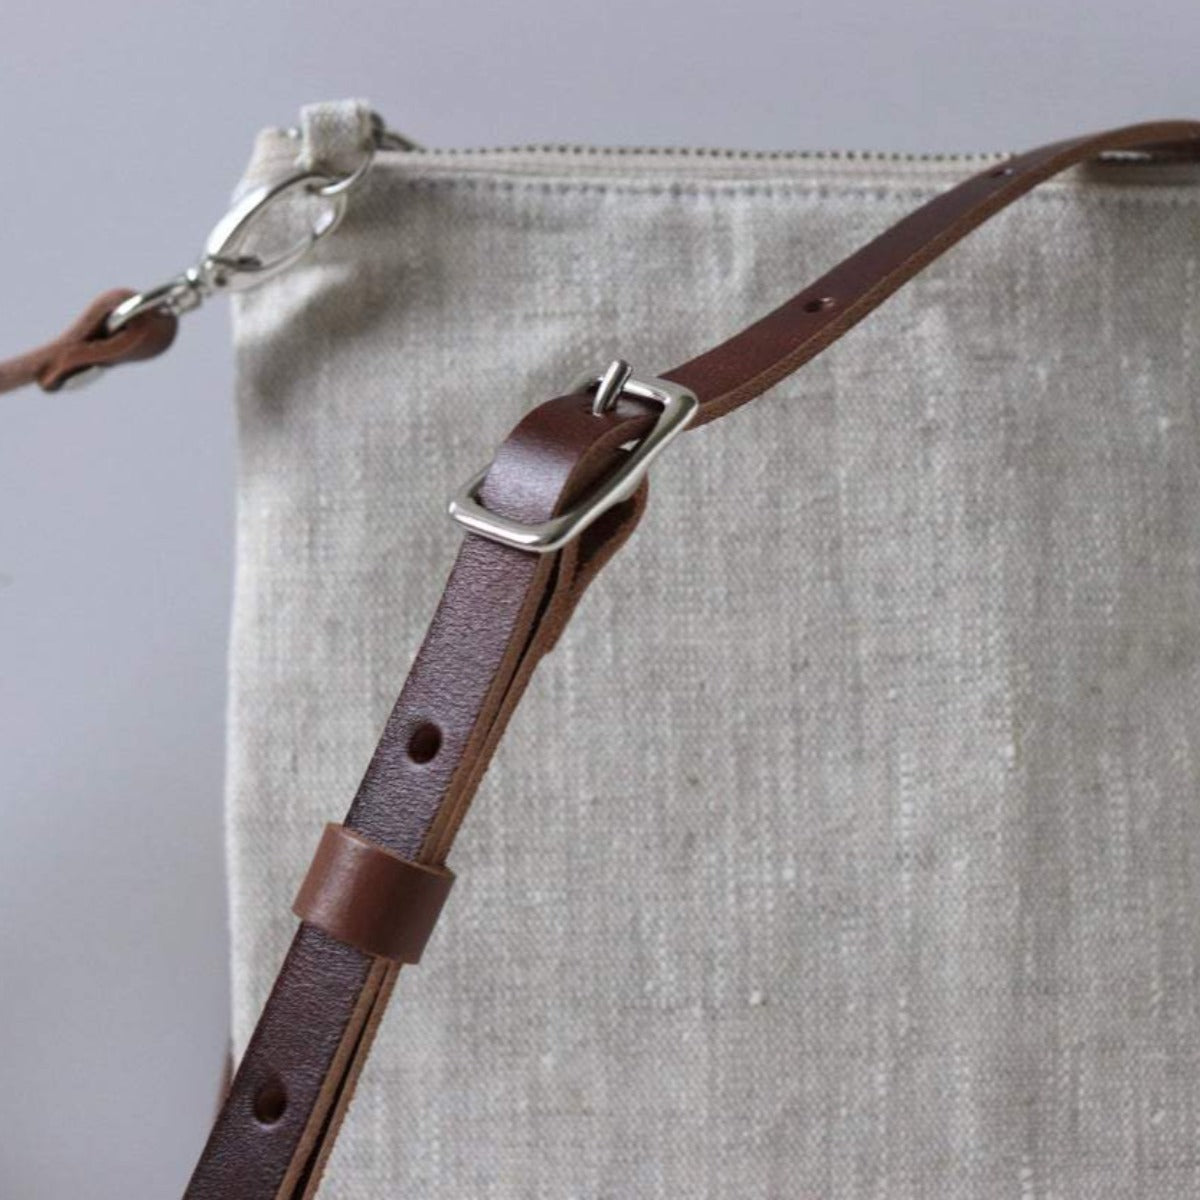 Crossbody Bag in Natural Linen and Leather